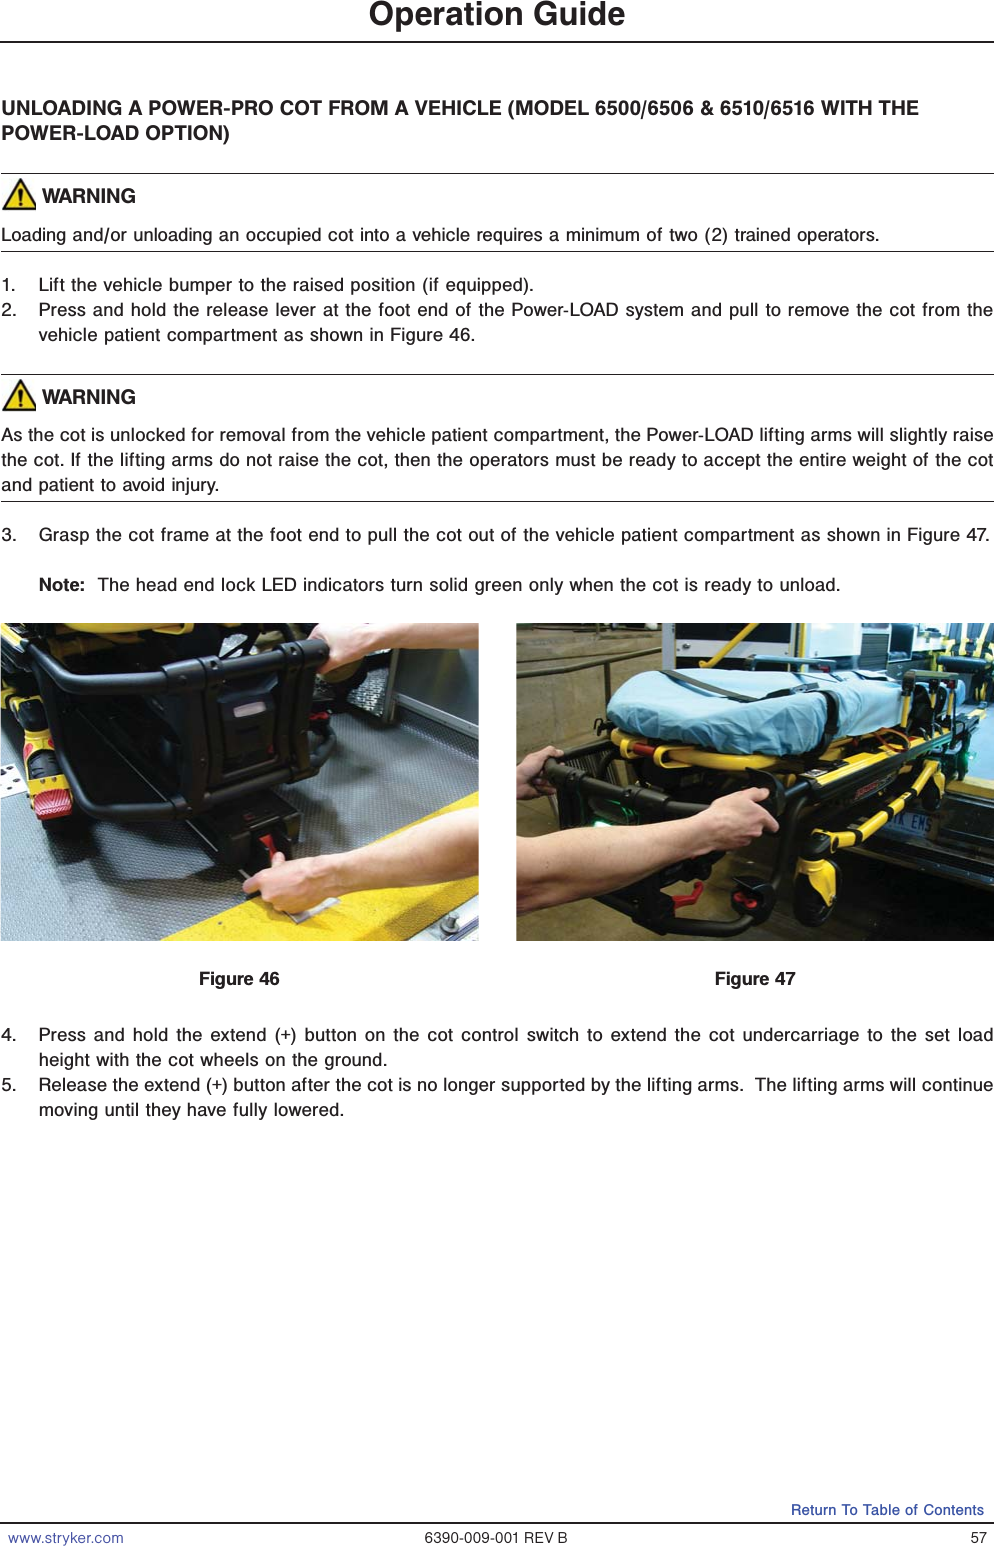 www.stryker.com 6390-009-001 REV B 57Return To Table of ContentsUNLOADING A POWER-PRO COT FROM A VEHICLE (MODEL 6500/6506 &amp; 6510/6516 WITH THE POWER-LOAD OPTION) WARNINGLoading and/or unloading an occupied cot into a vehicle requires a minimum of two (2) trained operators. 1.  Lift the vehicle bumper to the raised position (if equipped).2.  Press and hold the release lever at the foot end of the Power-LOAD system and pull to remove the cot from the vehicle patient compartment as shown in Figure 46. WARNINGAs the cot is unlocked for removal from the vehicle patient compartment, the Power-LOAD lifting arms will slightly raise the cot. If the lifting arms do not raise the cot, then the operators must be ready to accept the entire weight of the cot and patient to avoid injury. 3.  Grasp the cot frame at the foot end to pull the cot out of the vehicle patient compartment as shown in Figure 47.Note:  The head end lock LED indicators turn solid green only when the cot is ready to unload.  4.  Press and hold the extend (+) button on the cot control switch to extend the cot undercarriage to the set load height with the cot wheels on the ground.5.  Release the extend (+) button after the cot is no longer supported by the lifting arms.  The lifting arms will continue moving until they have fully lowered.Operation GuideFigure 46 Figure 47